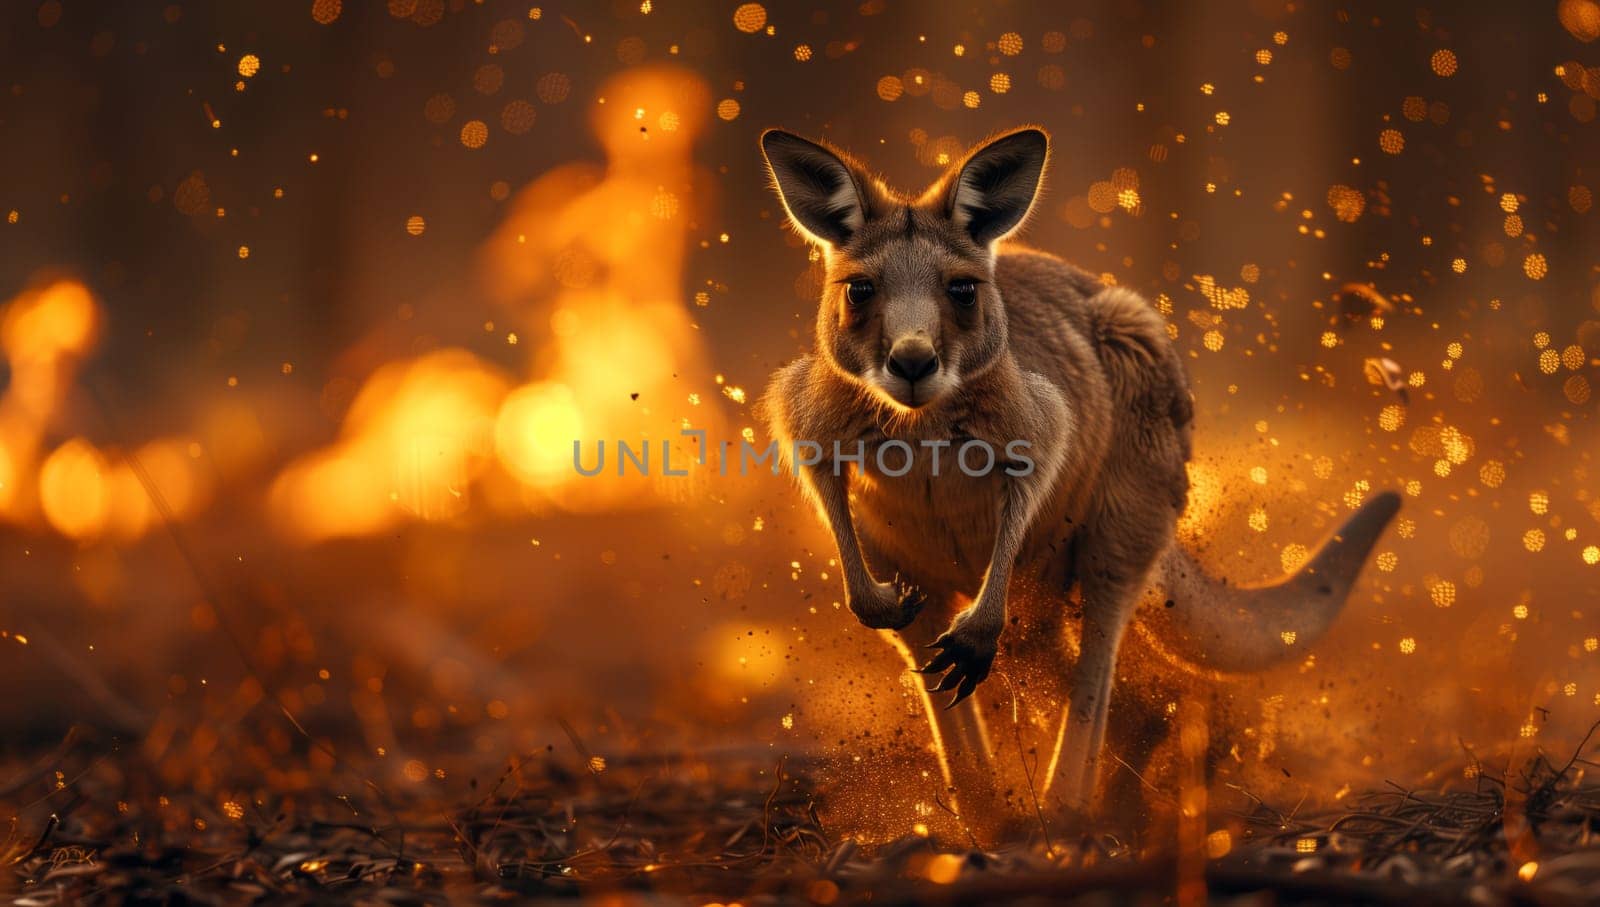 A fawnlike terrestrial animal with a long tail, a kangaroo, is sprinting across the grassy landscape in front of a blazing fire during a nighttime event